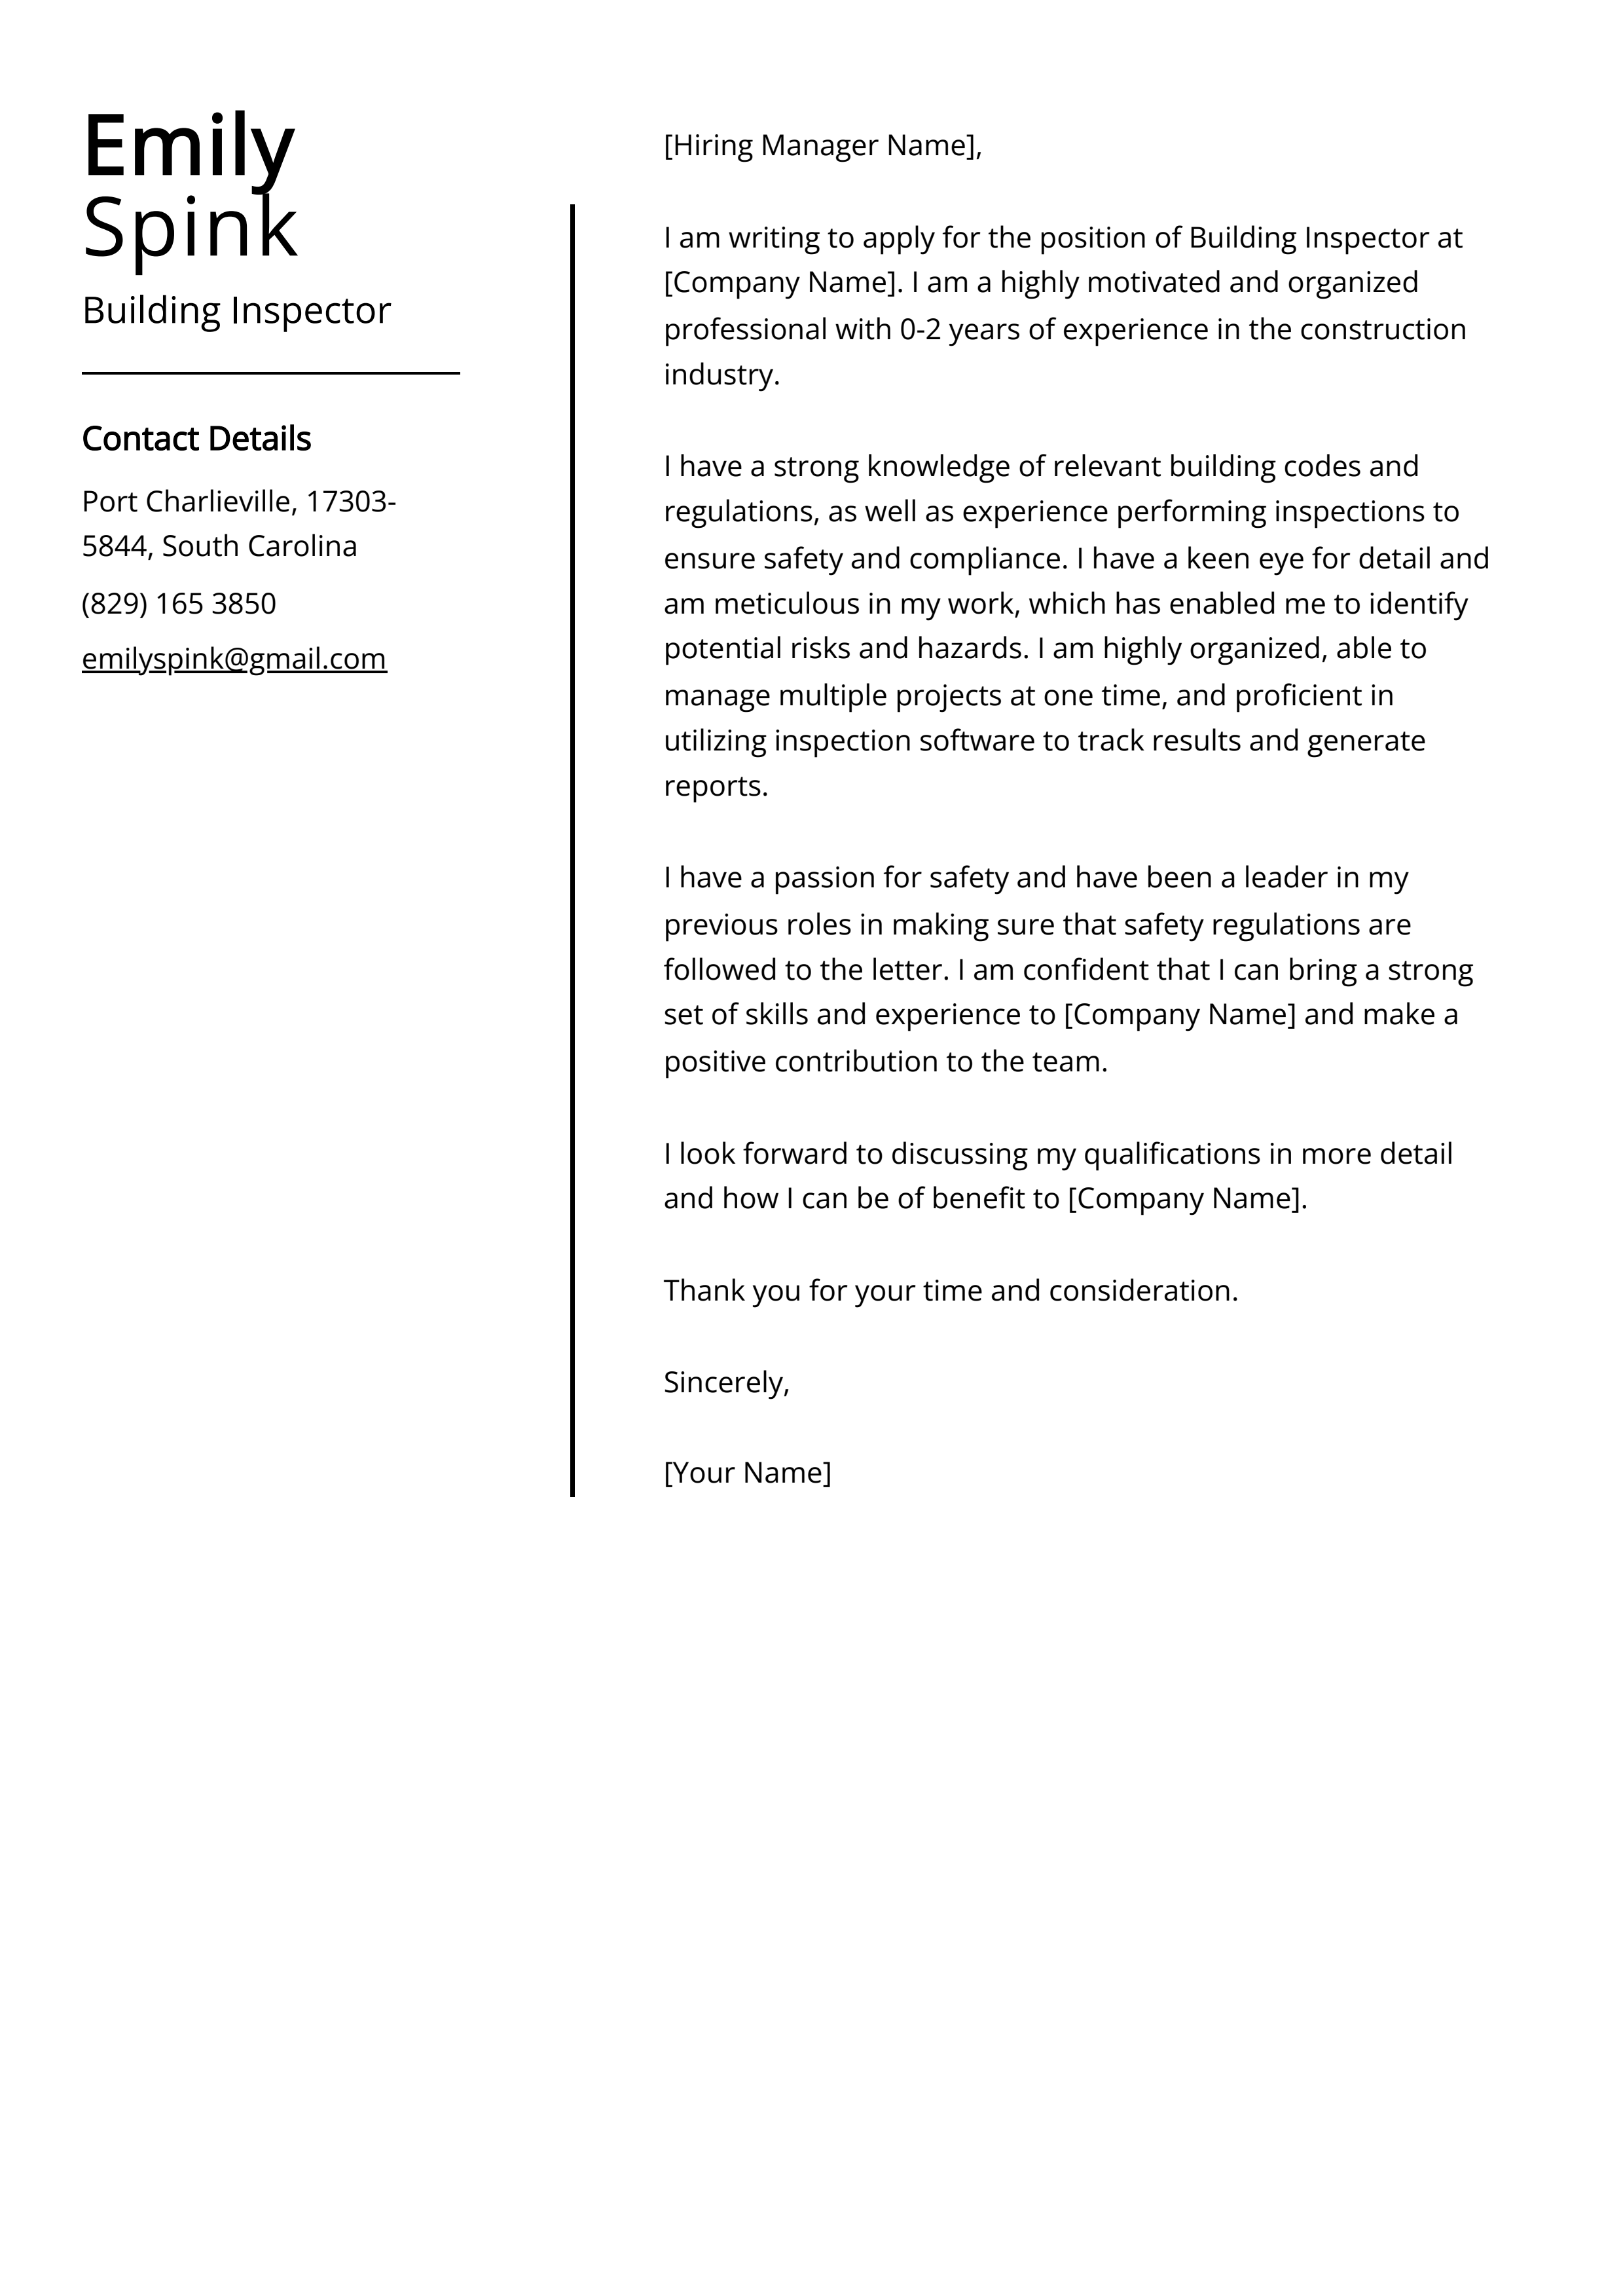 Building Inspector Cover Letter Example